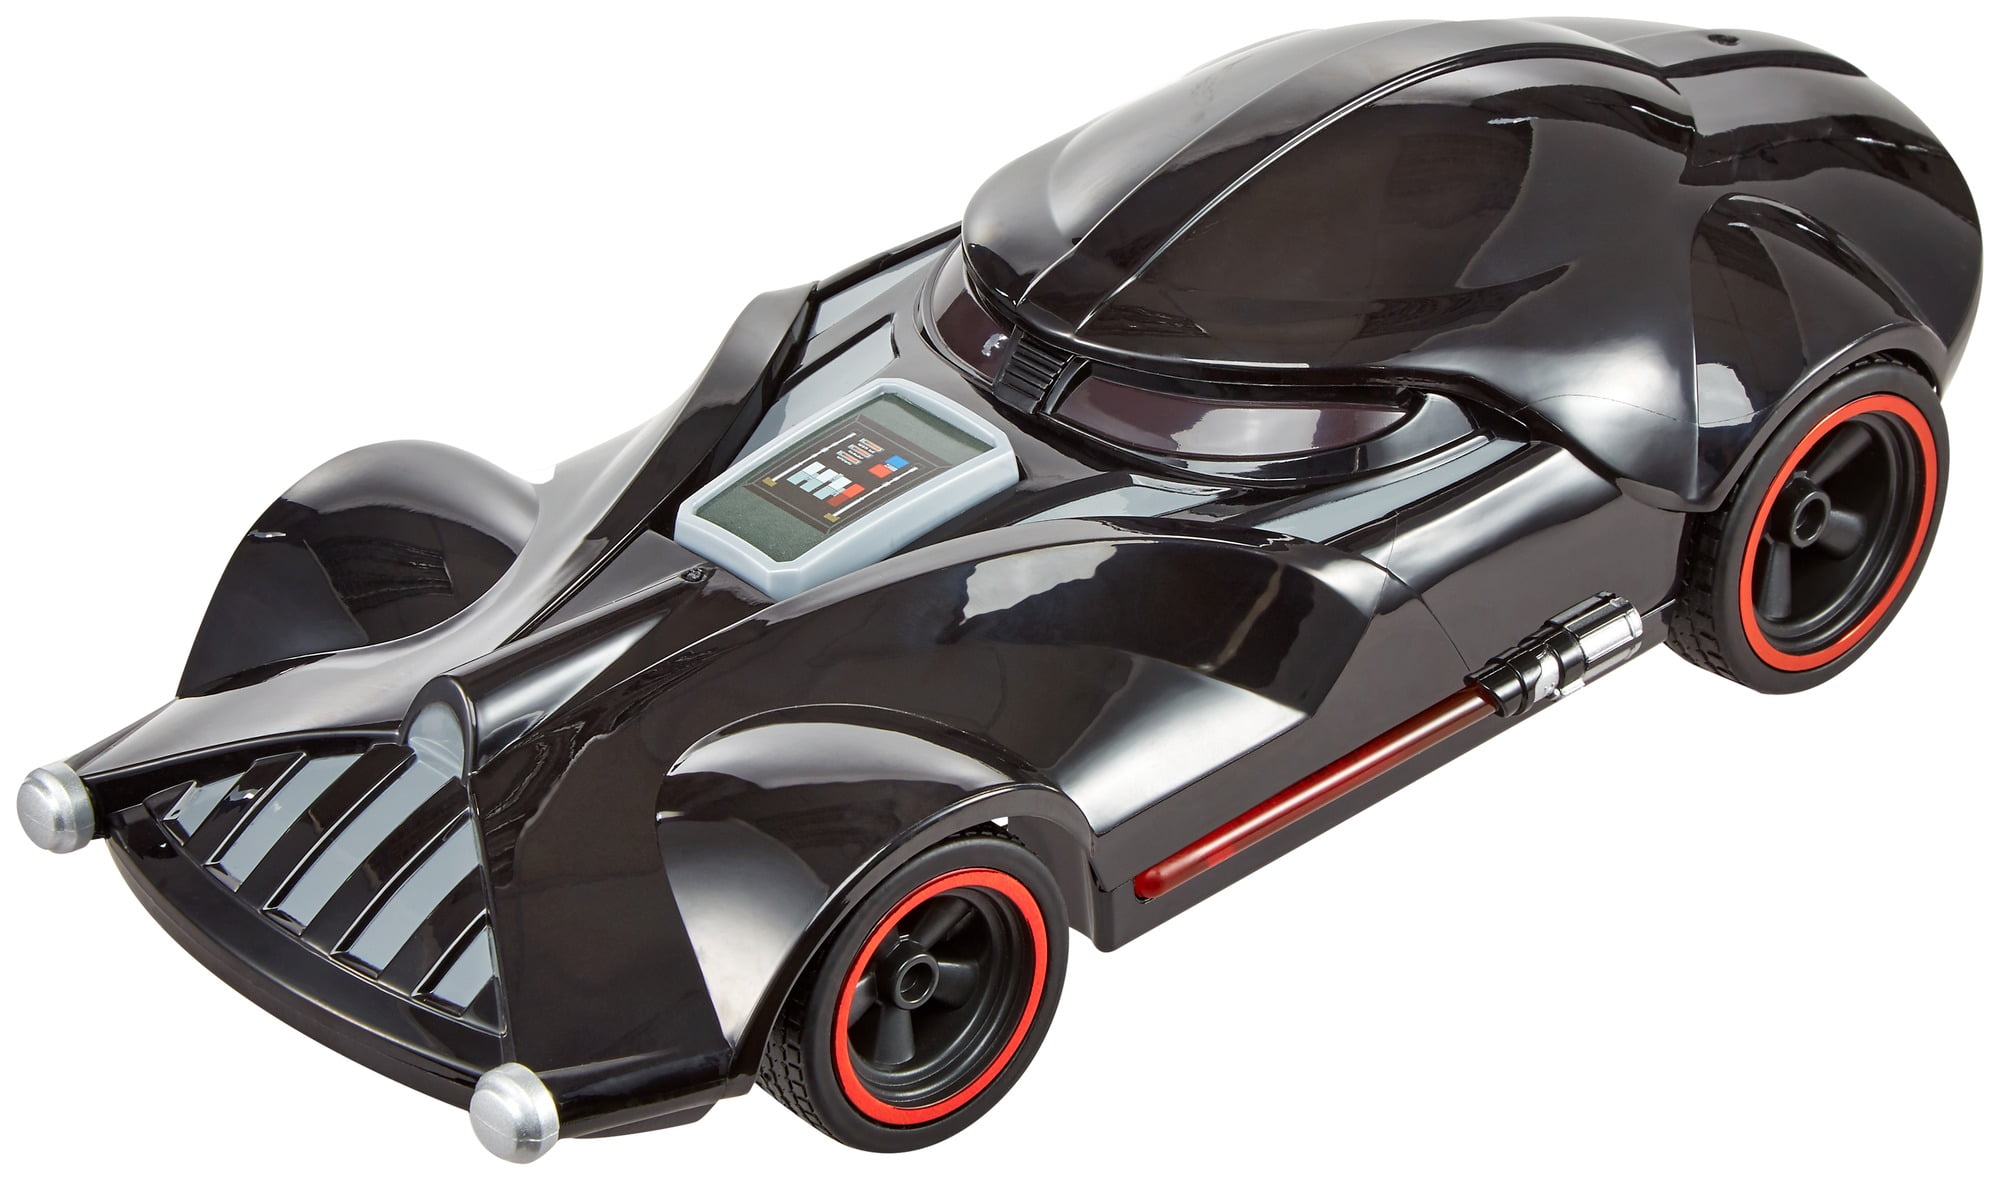 Star Wars Hot Wheels Darth Vader With Swing out Lightsaber Character Car 2017 for sale online 